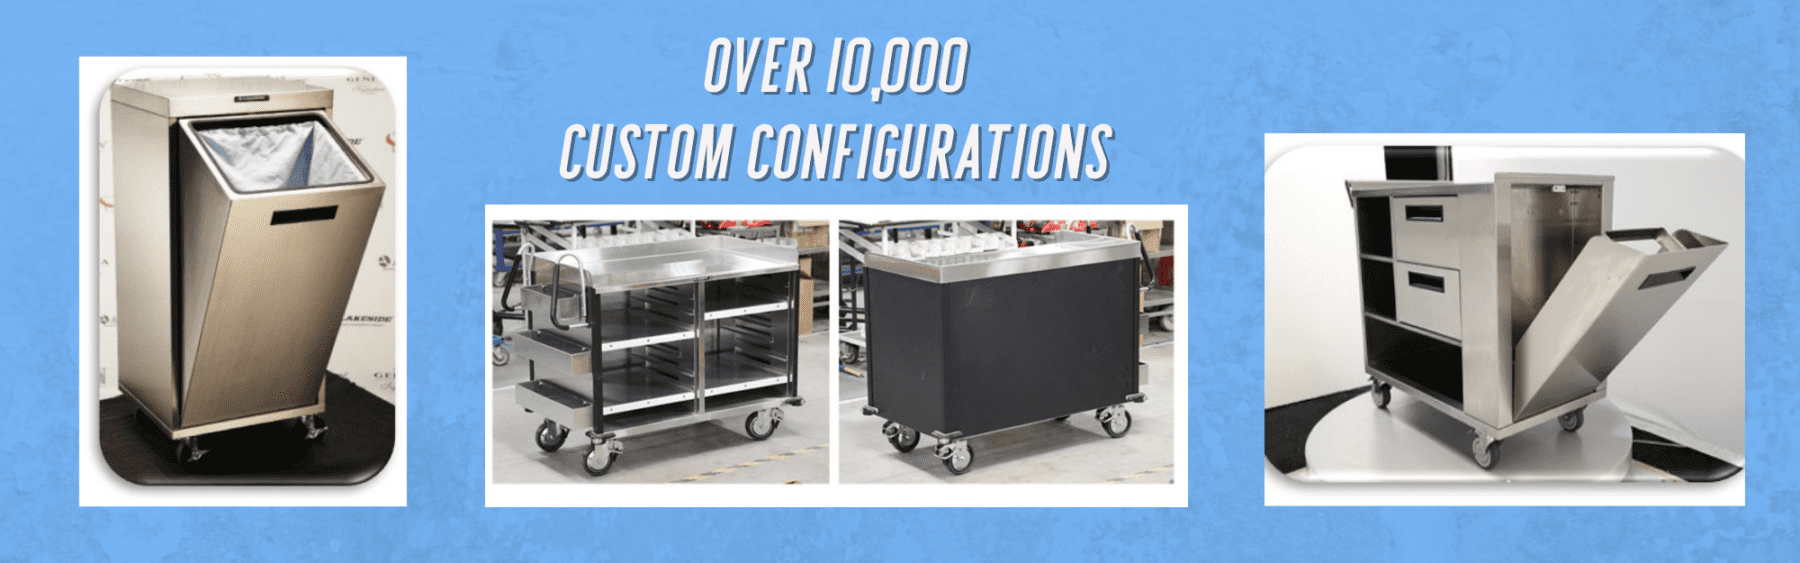 three different customized utility carts. Description reads: Over 10,000 custom configurations.